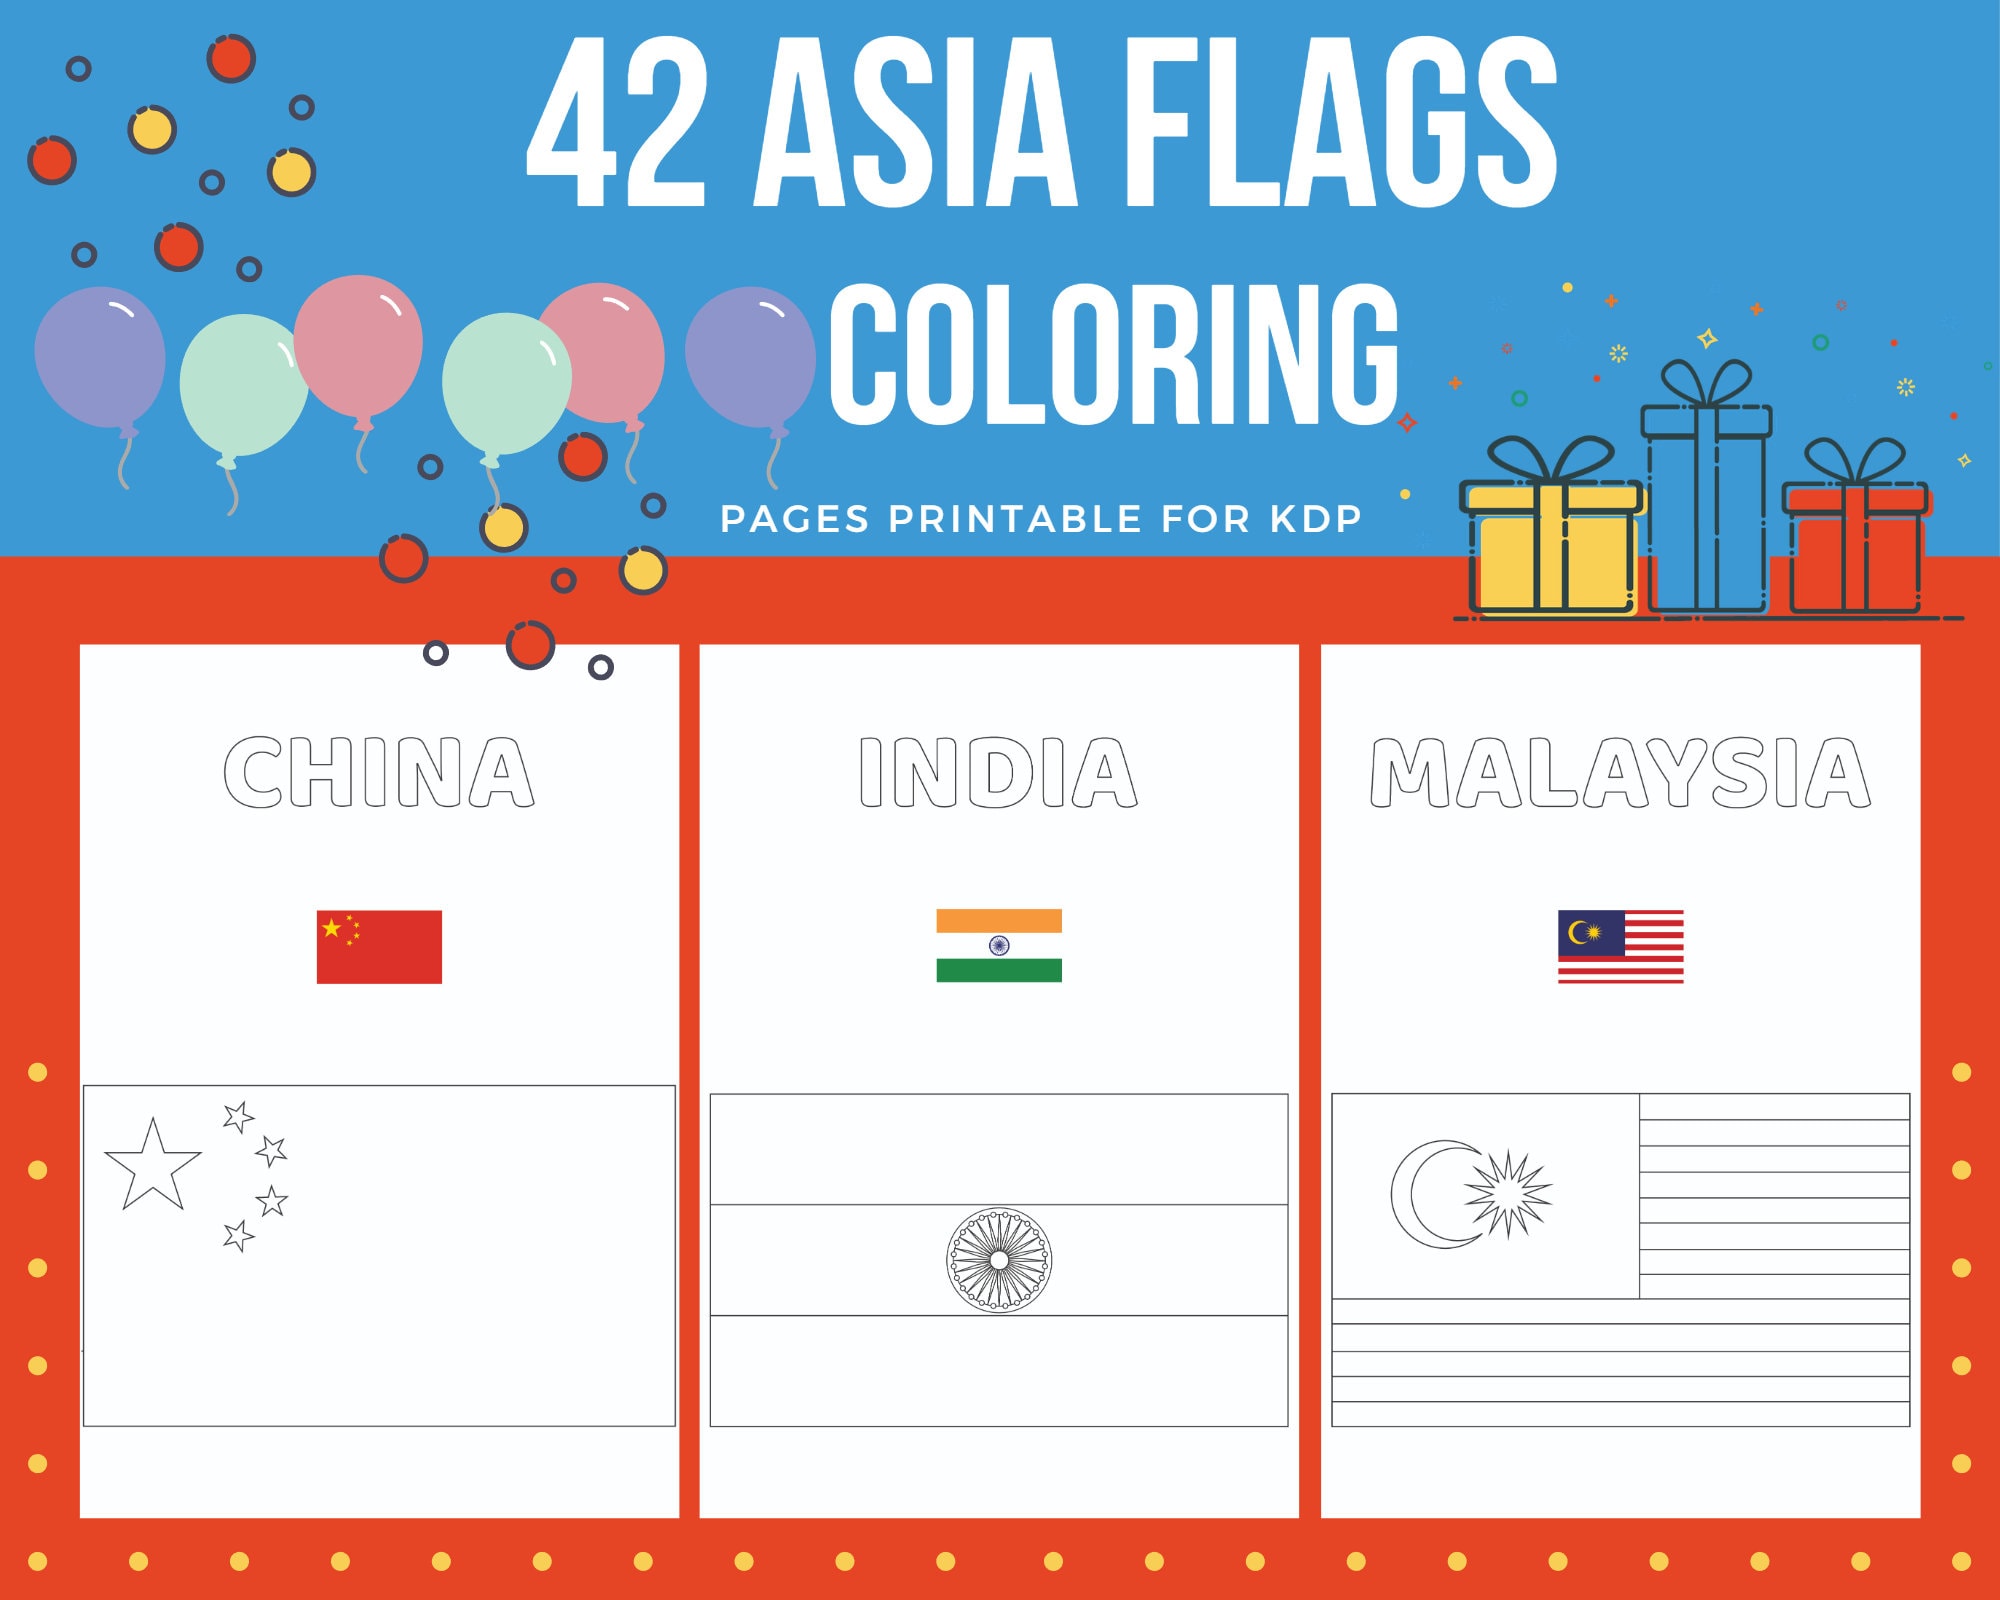 Asia flags coloring pages printable for kids pdf file us letter instant download kdp coloring book for kids download now